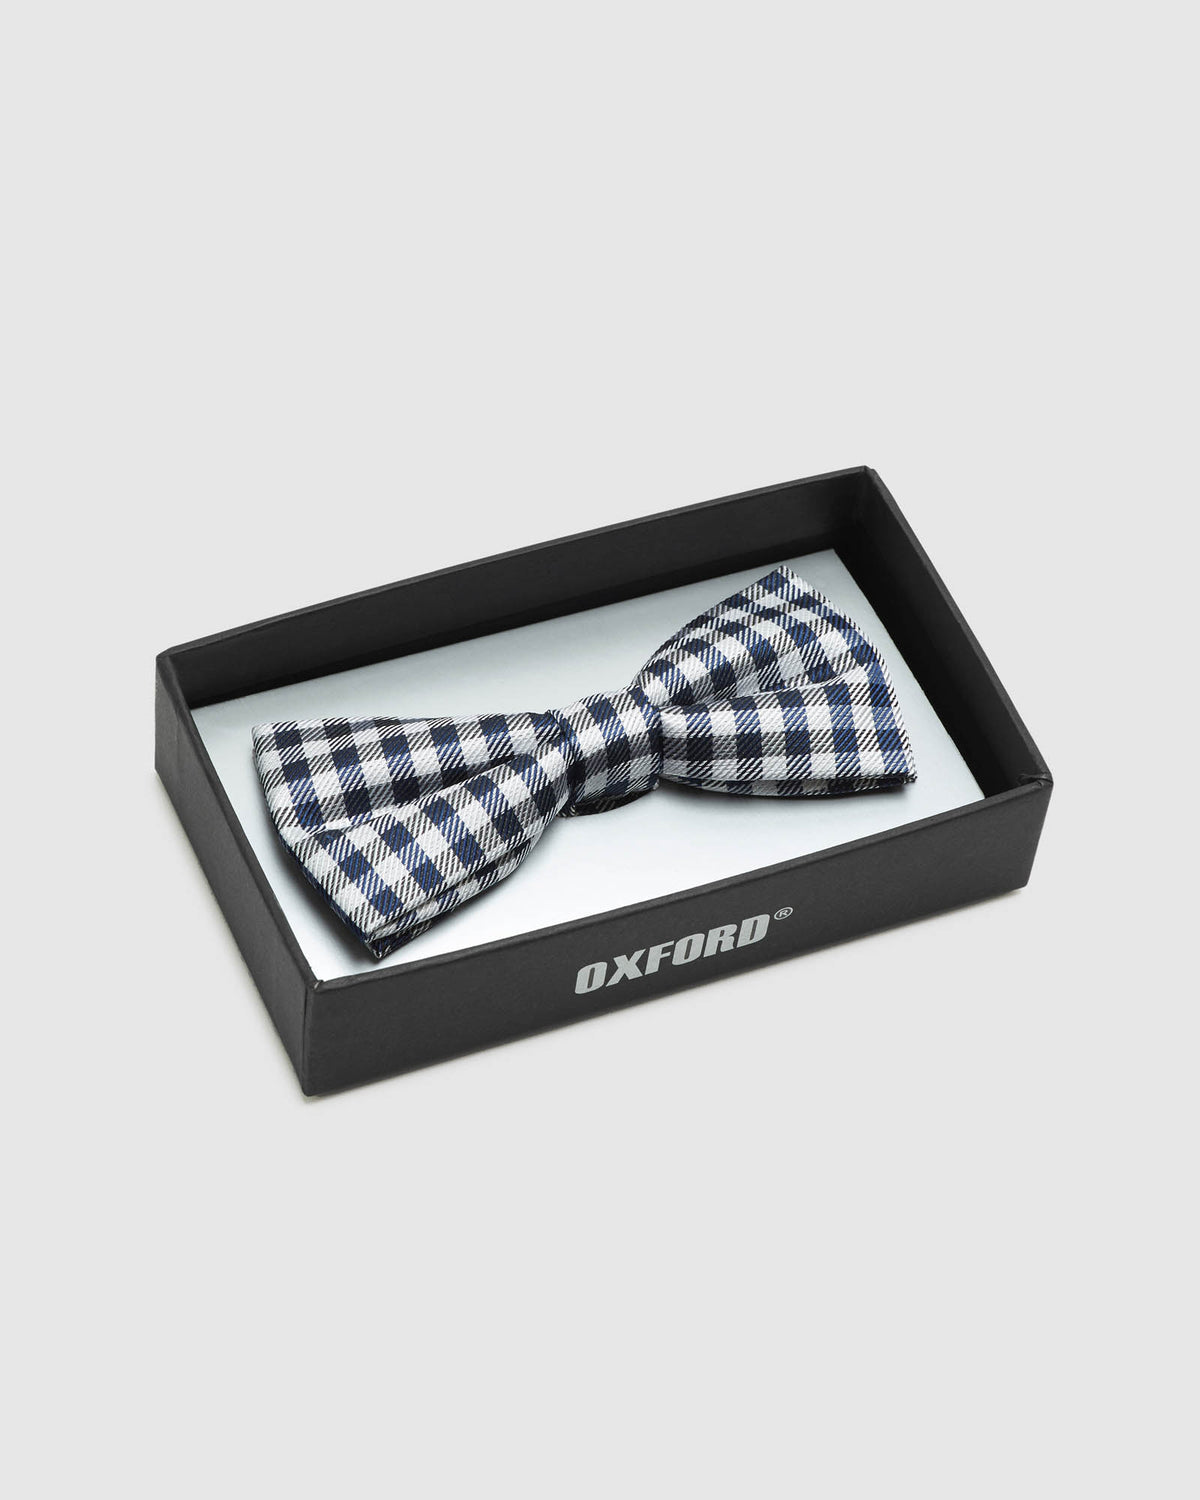 GINGHAM SILK BOW TIE MENS ACCESSORIES